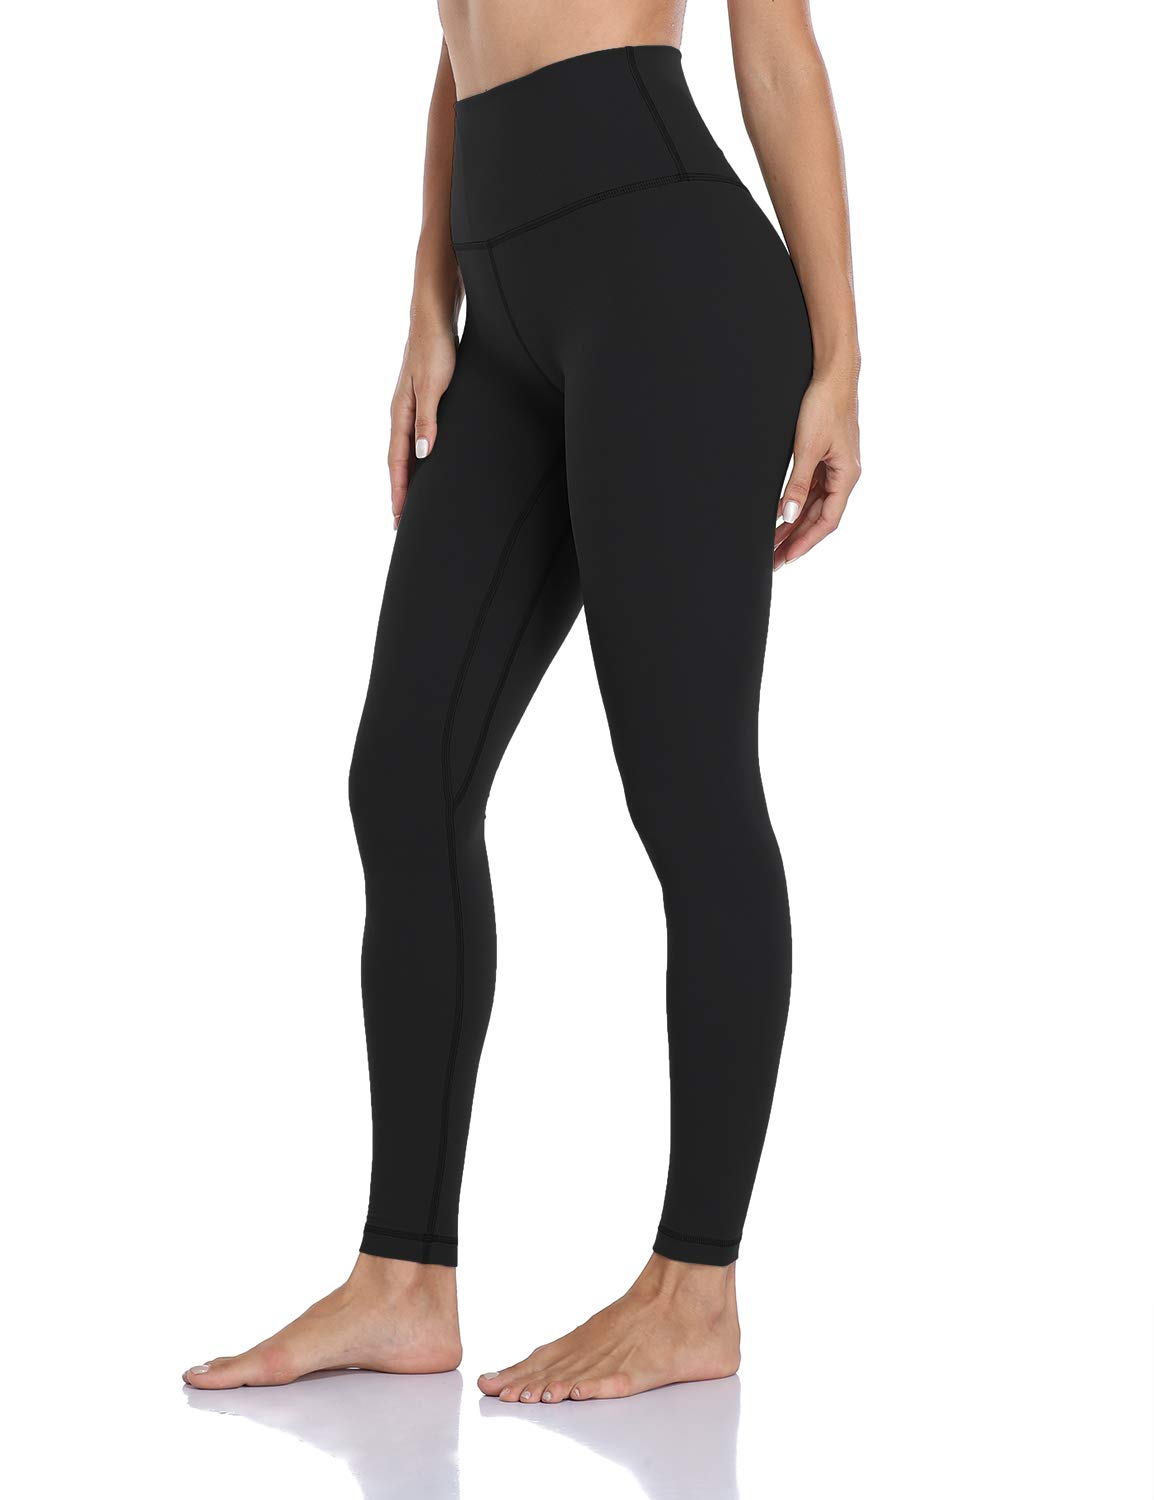 HeyNuts Essential Full Length Yoga Leggings, Women's High Waisted Workout  Compression Pants 28